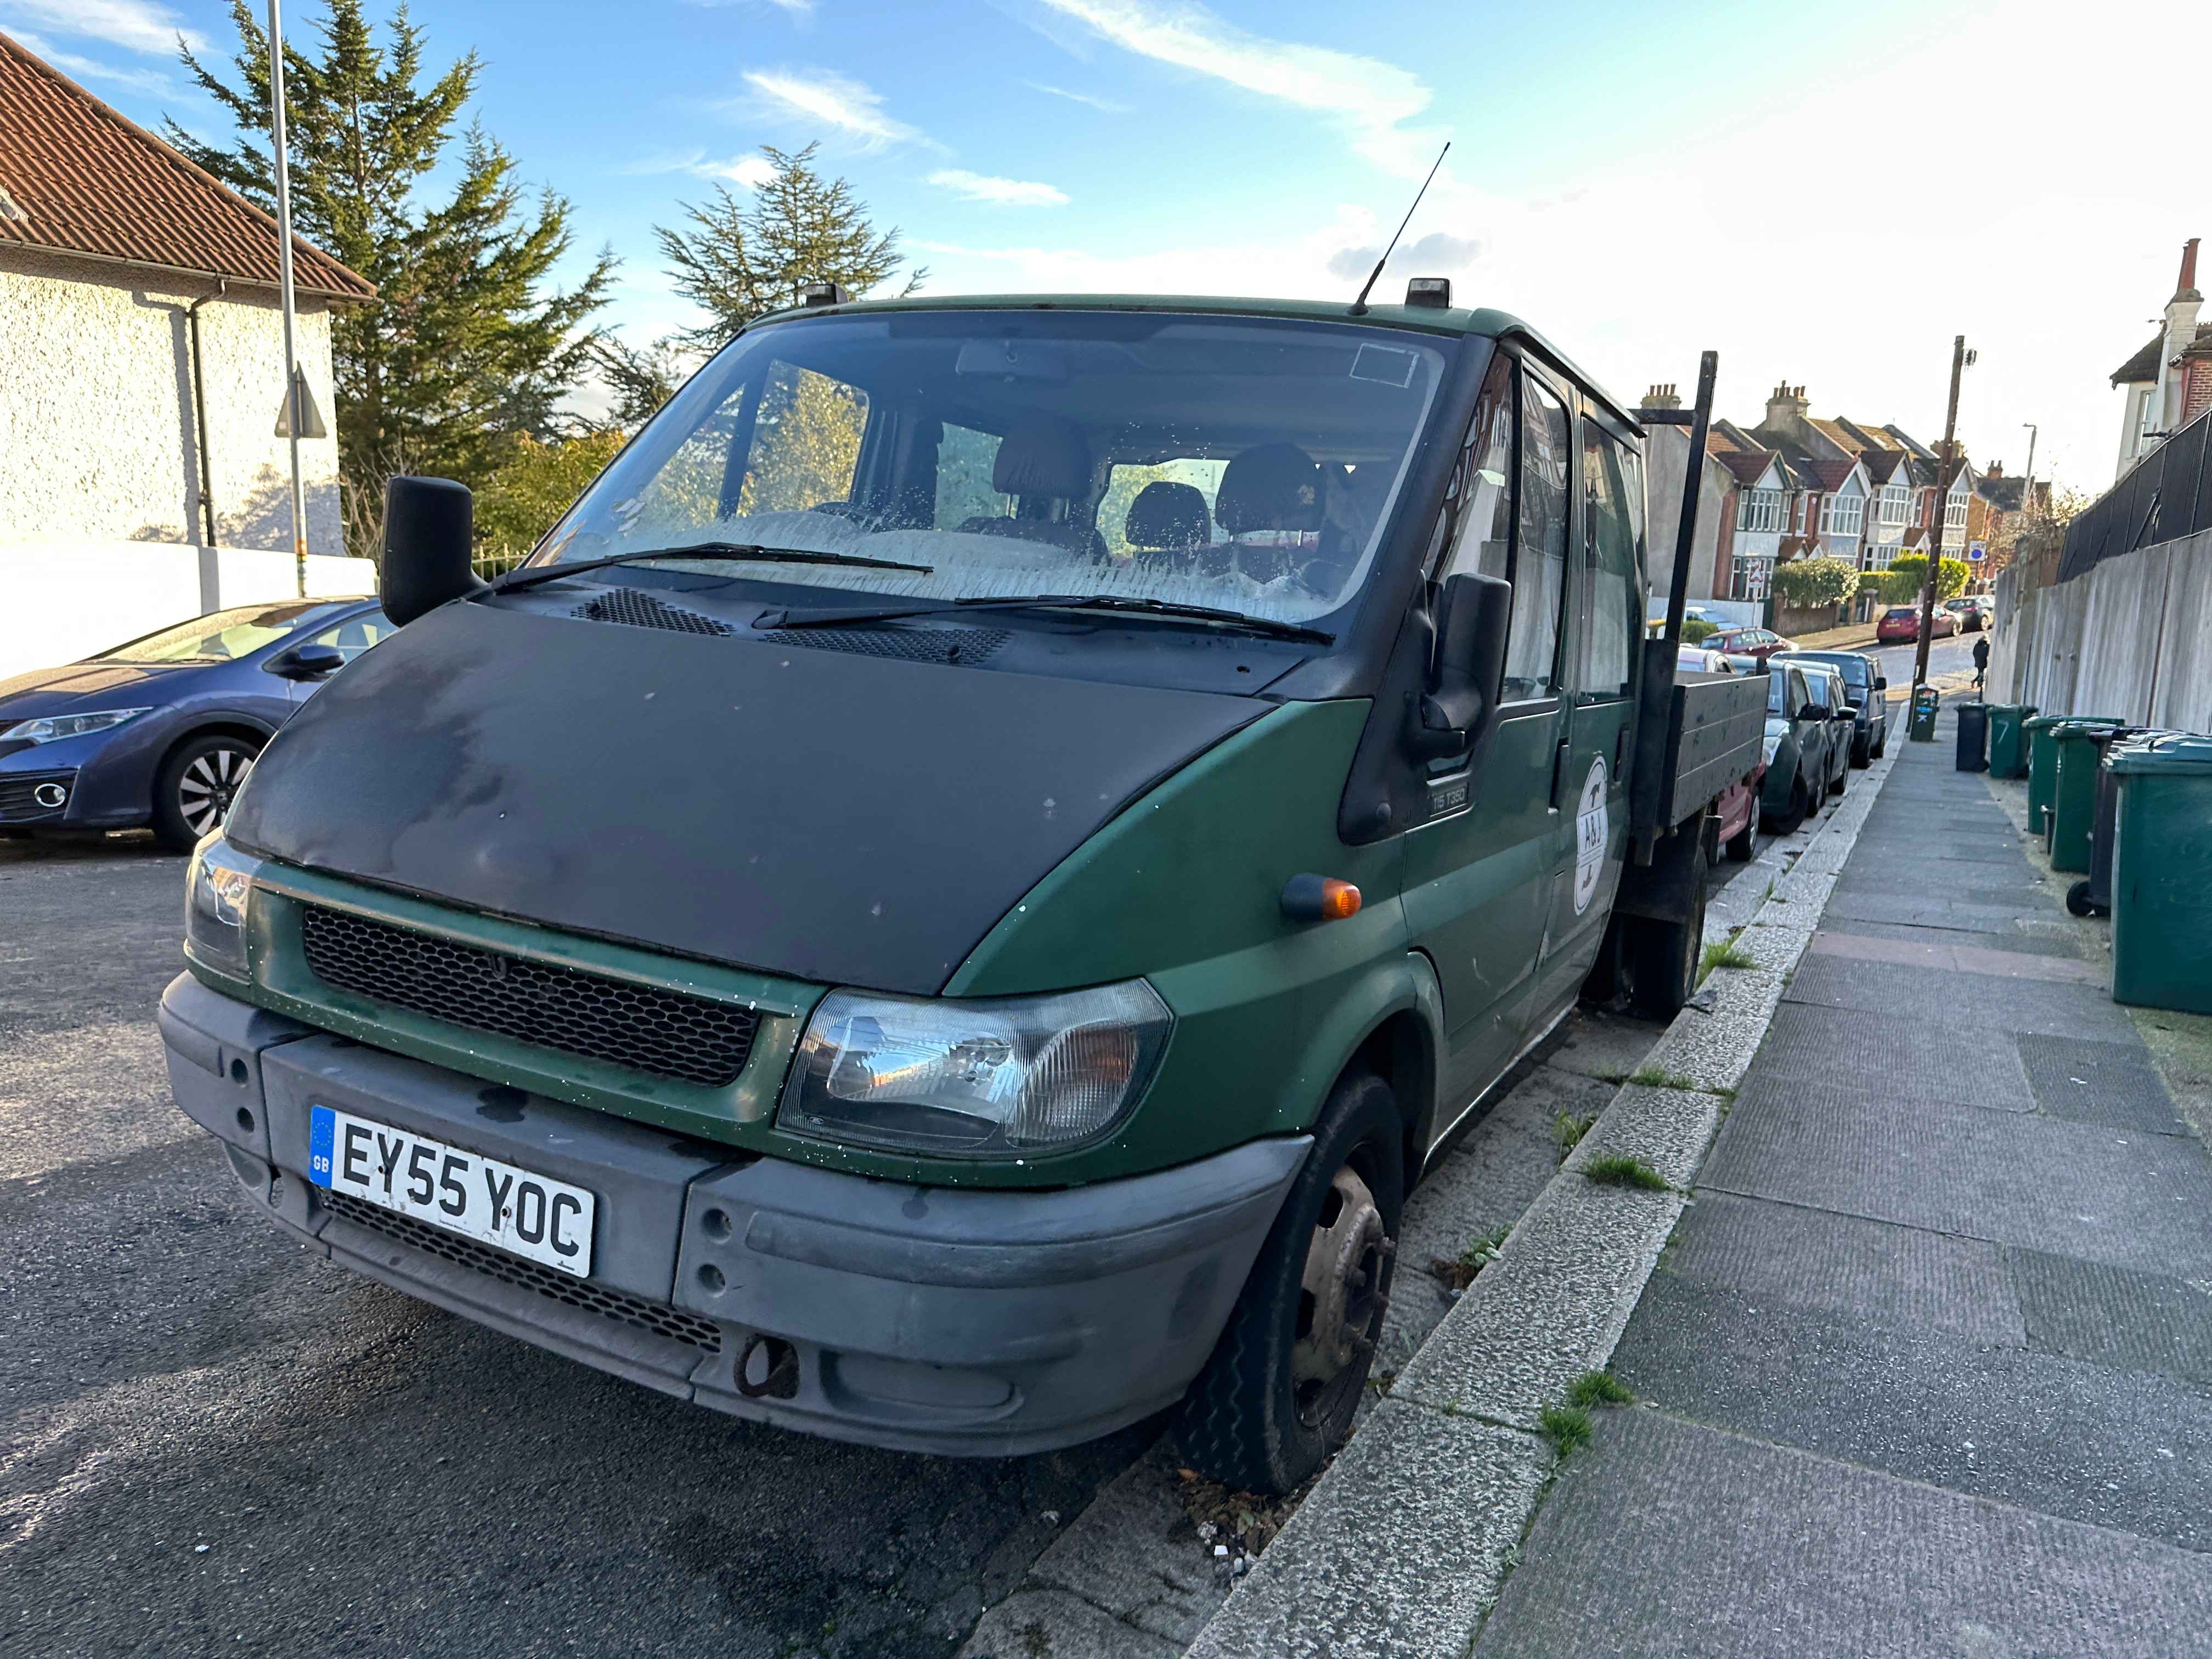 Photograph of EY55 YOC - a Green Ford Transit parked in Hollingdean by a non-resident, and potentially abandoned. The first of three photographs supplied by the residents of Hollingdean.